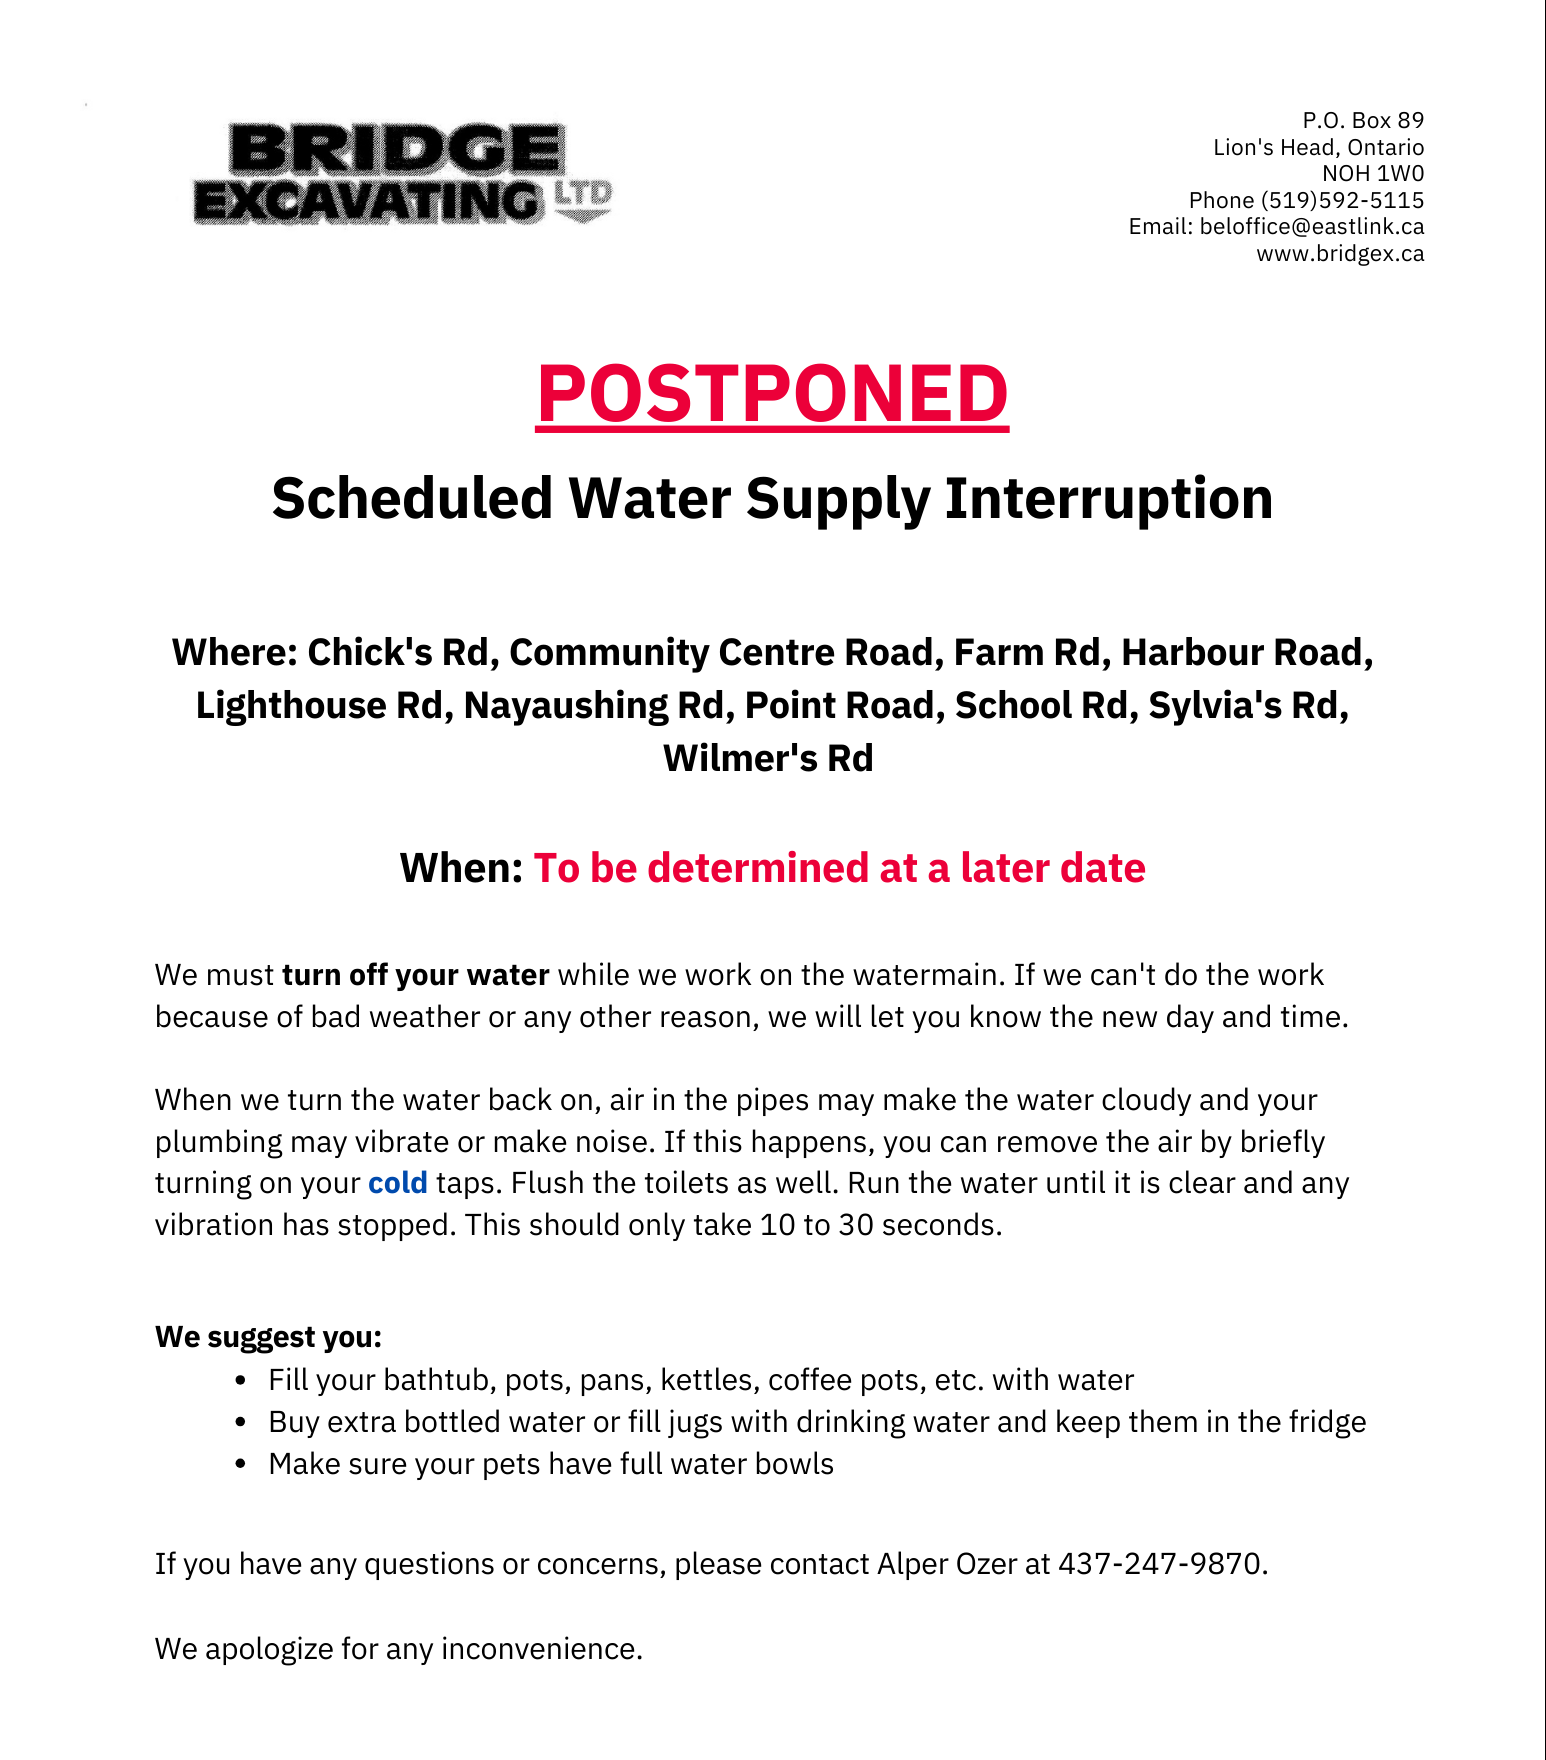 Postponed - Scheduled Water Supply Interruption. When: to be determined at a later date. Where: Chick's Rd, Community Centre Road, Farm Rd, Harbour Road, Lighthouse Rd, Nayaushing Rd, Point Road, School Rd, Sylvia's Rd, Wilmer's Rd 